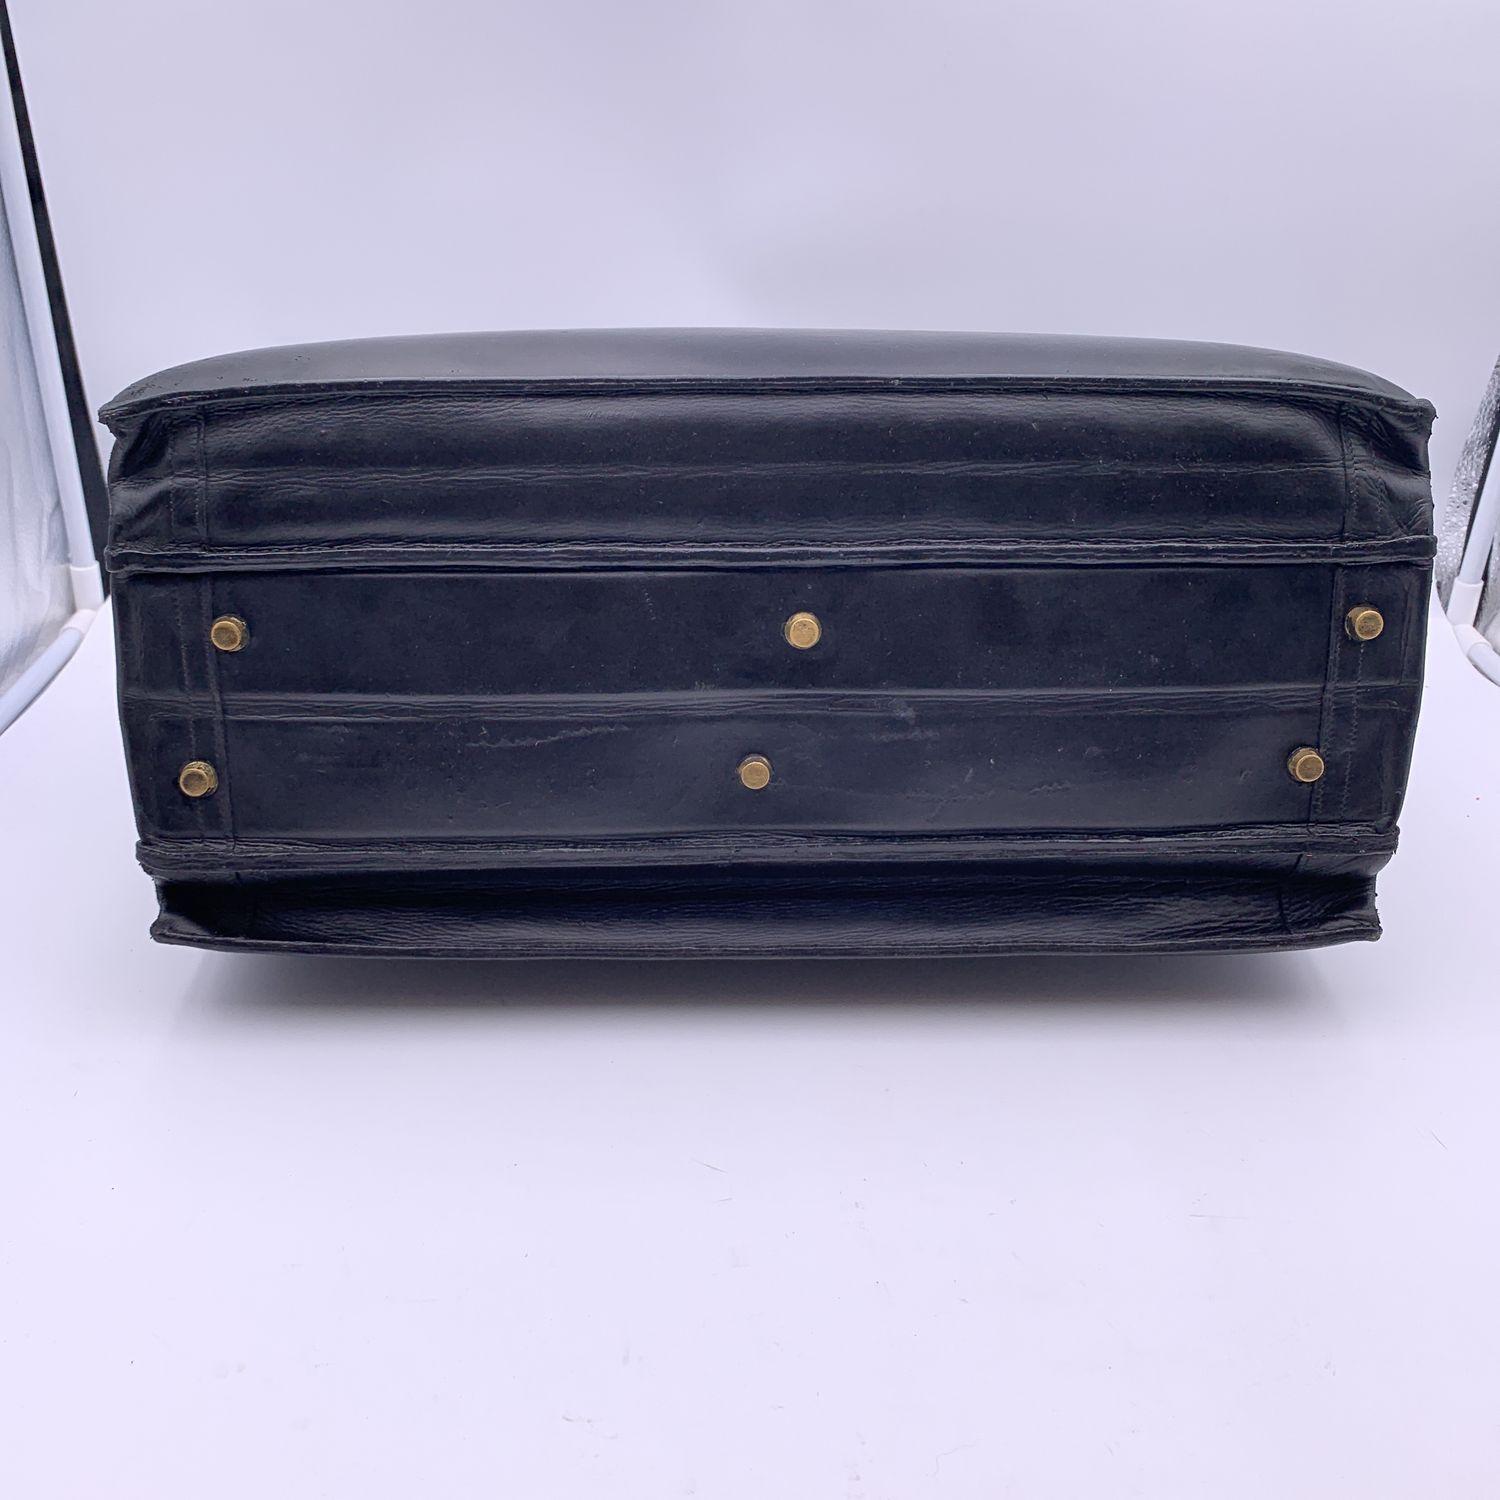 This beautiful Bag will come with a Certificate of Authenticity provided by Real Authentication. The certificate will be provided at no further cost.

Vintage Hermes document pilot case/briefcase case crafted in black leather. Fold over strap with